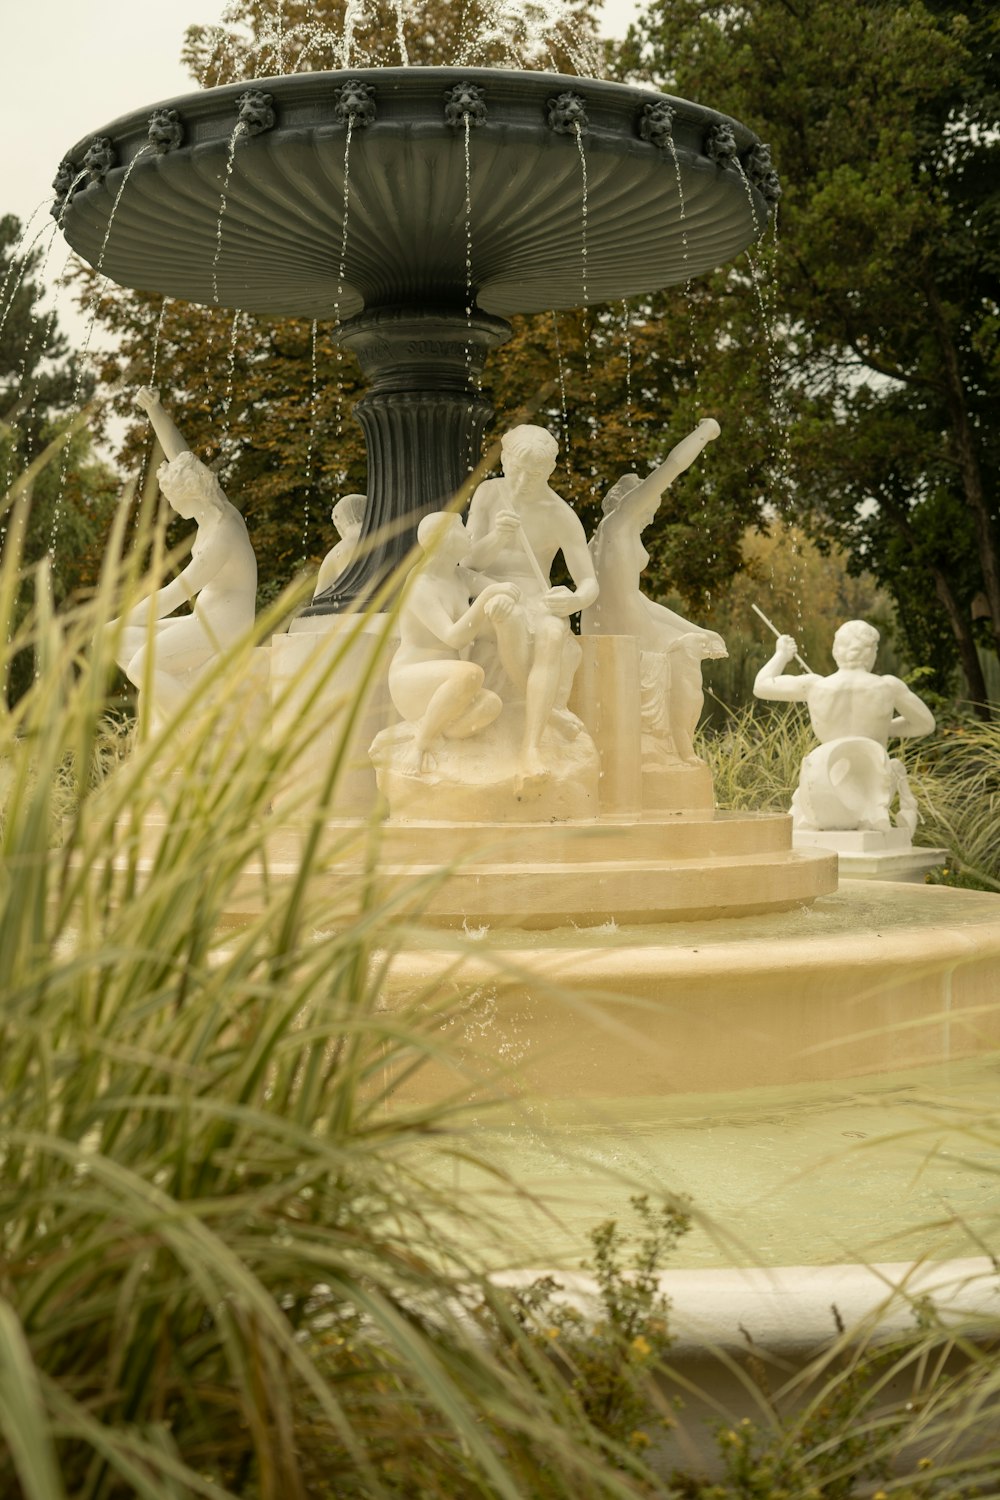 a fountain with statues of people in it